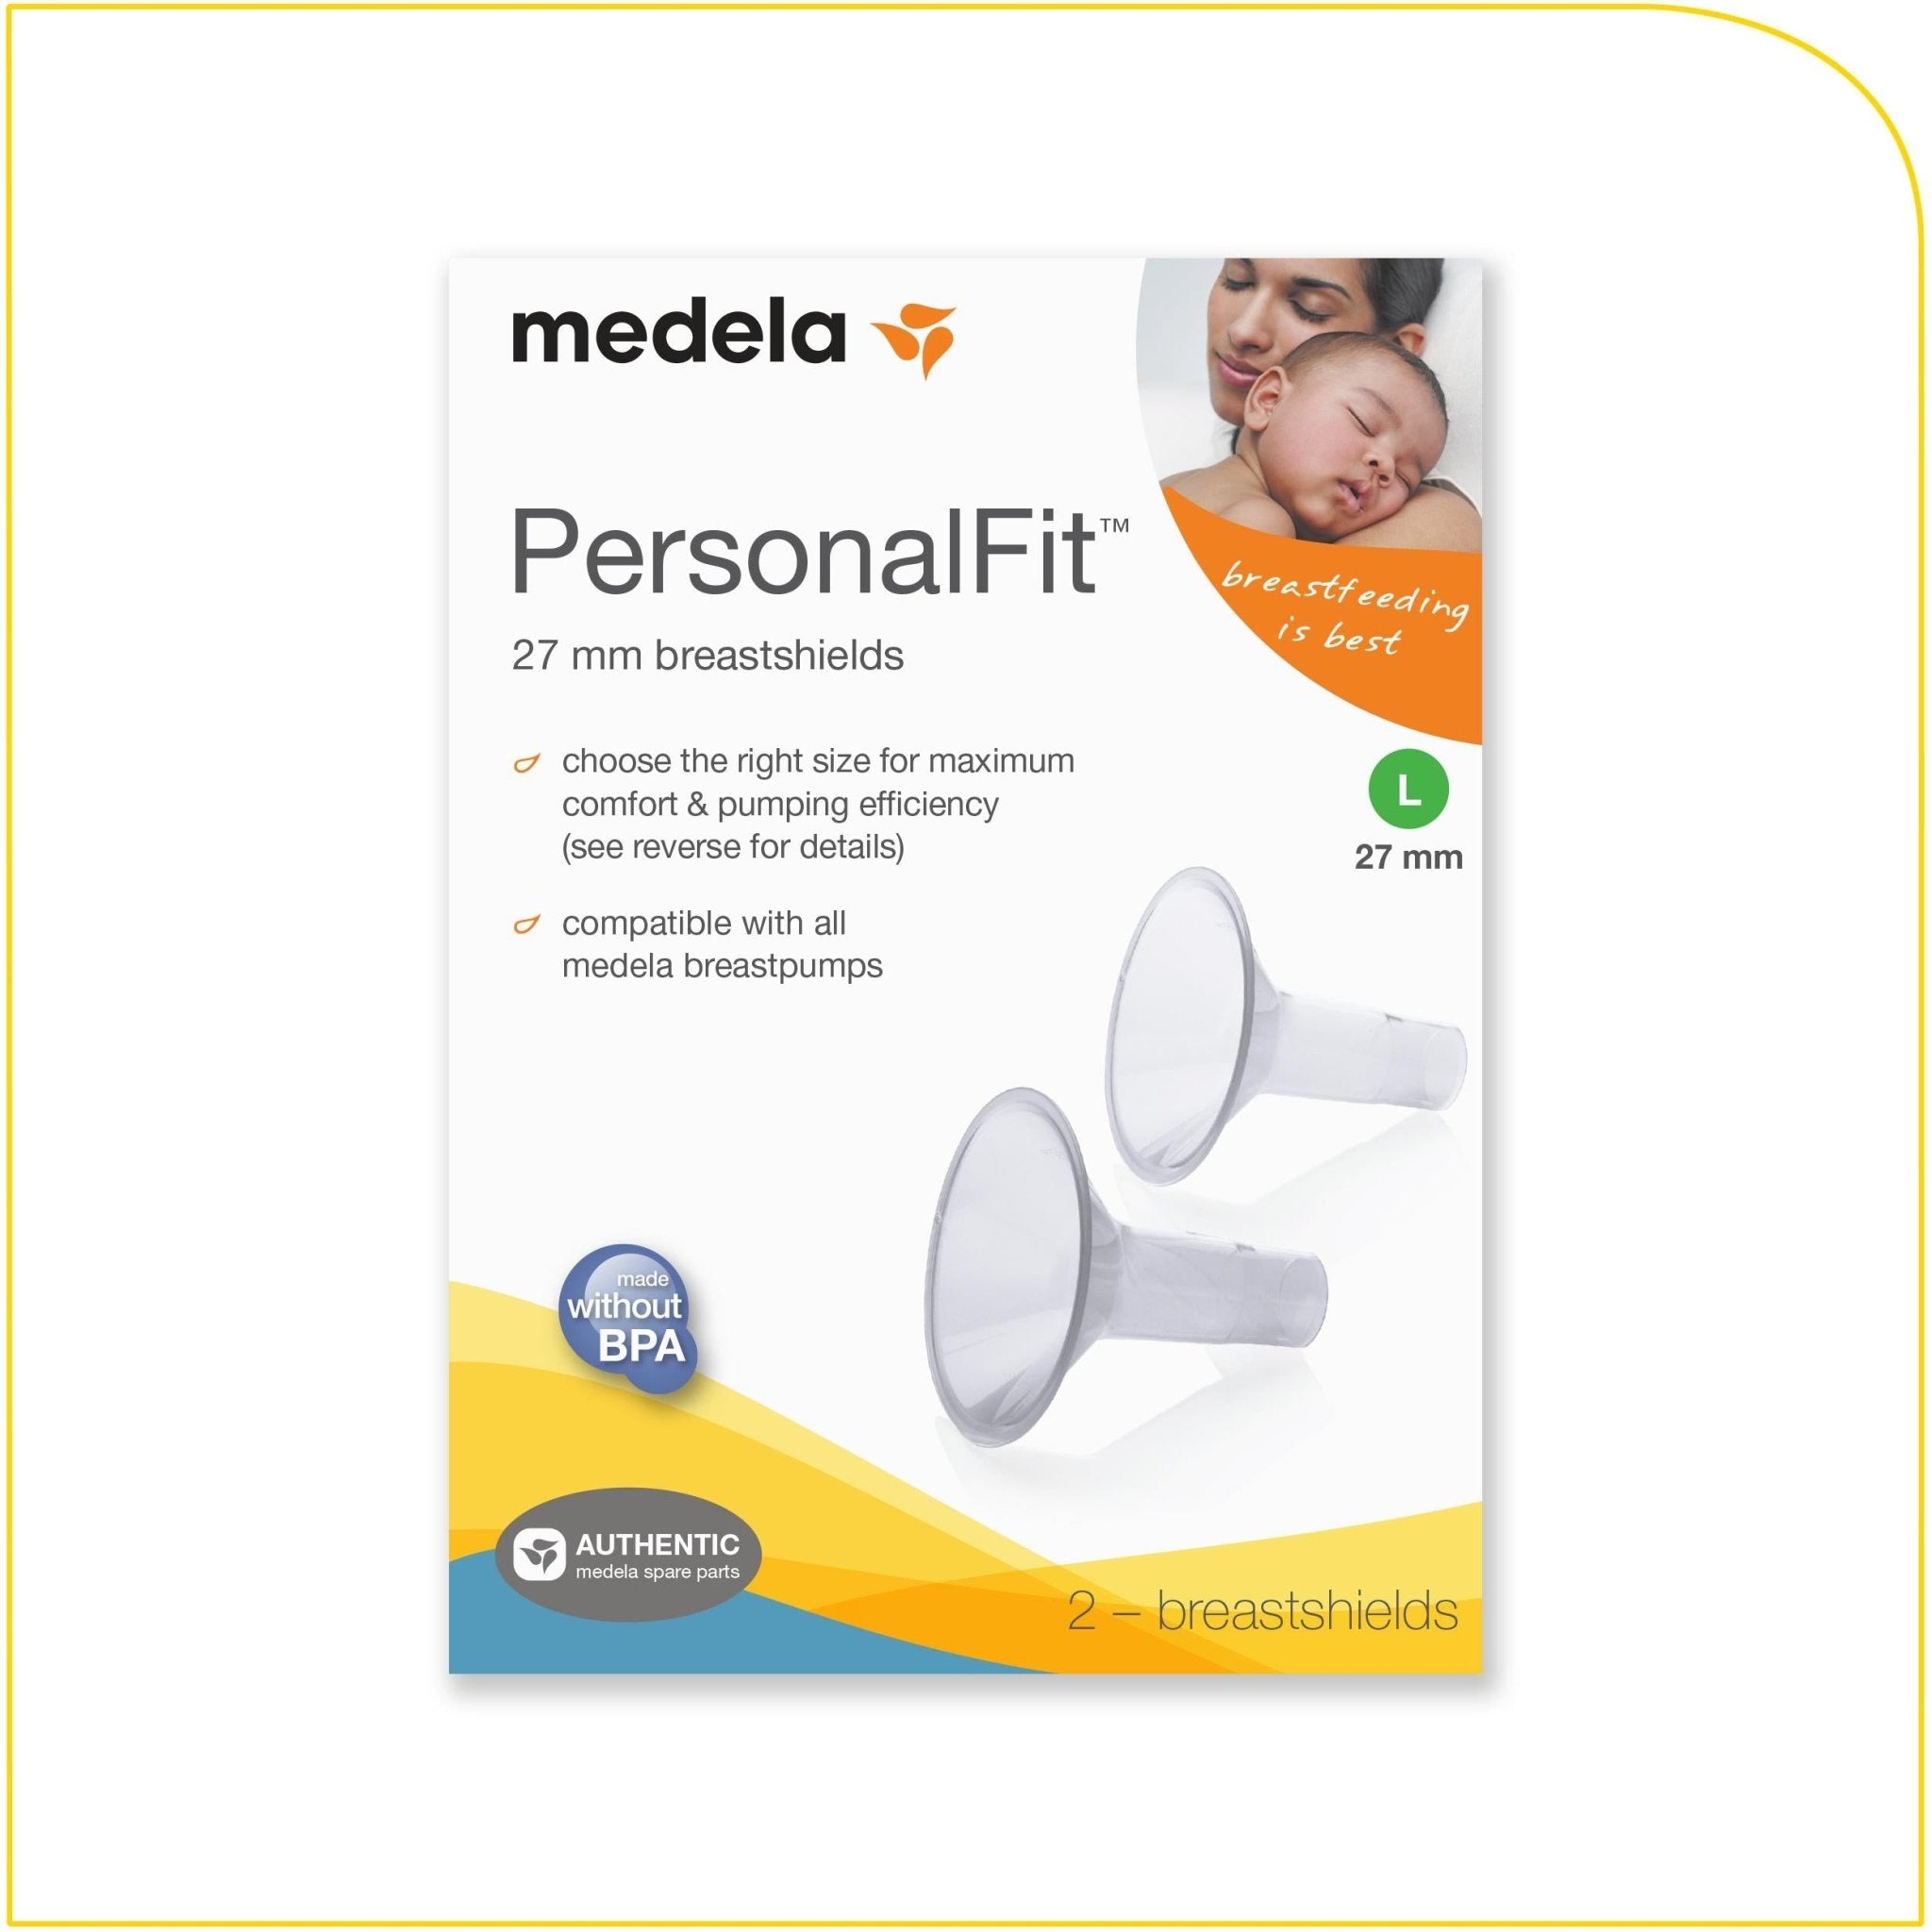 Medela Breast Shield Sizes - How to know if the size is right for